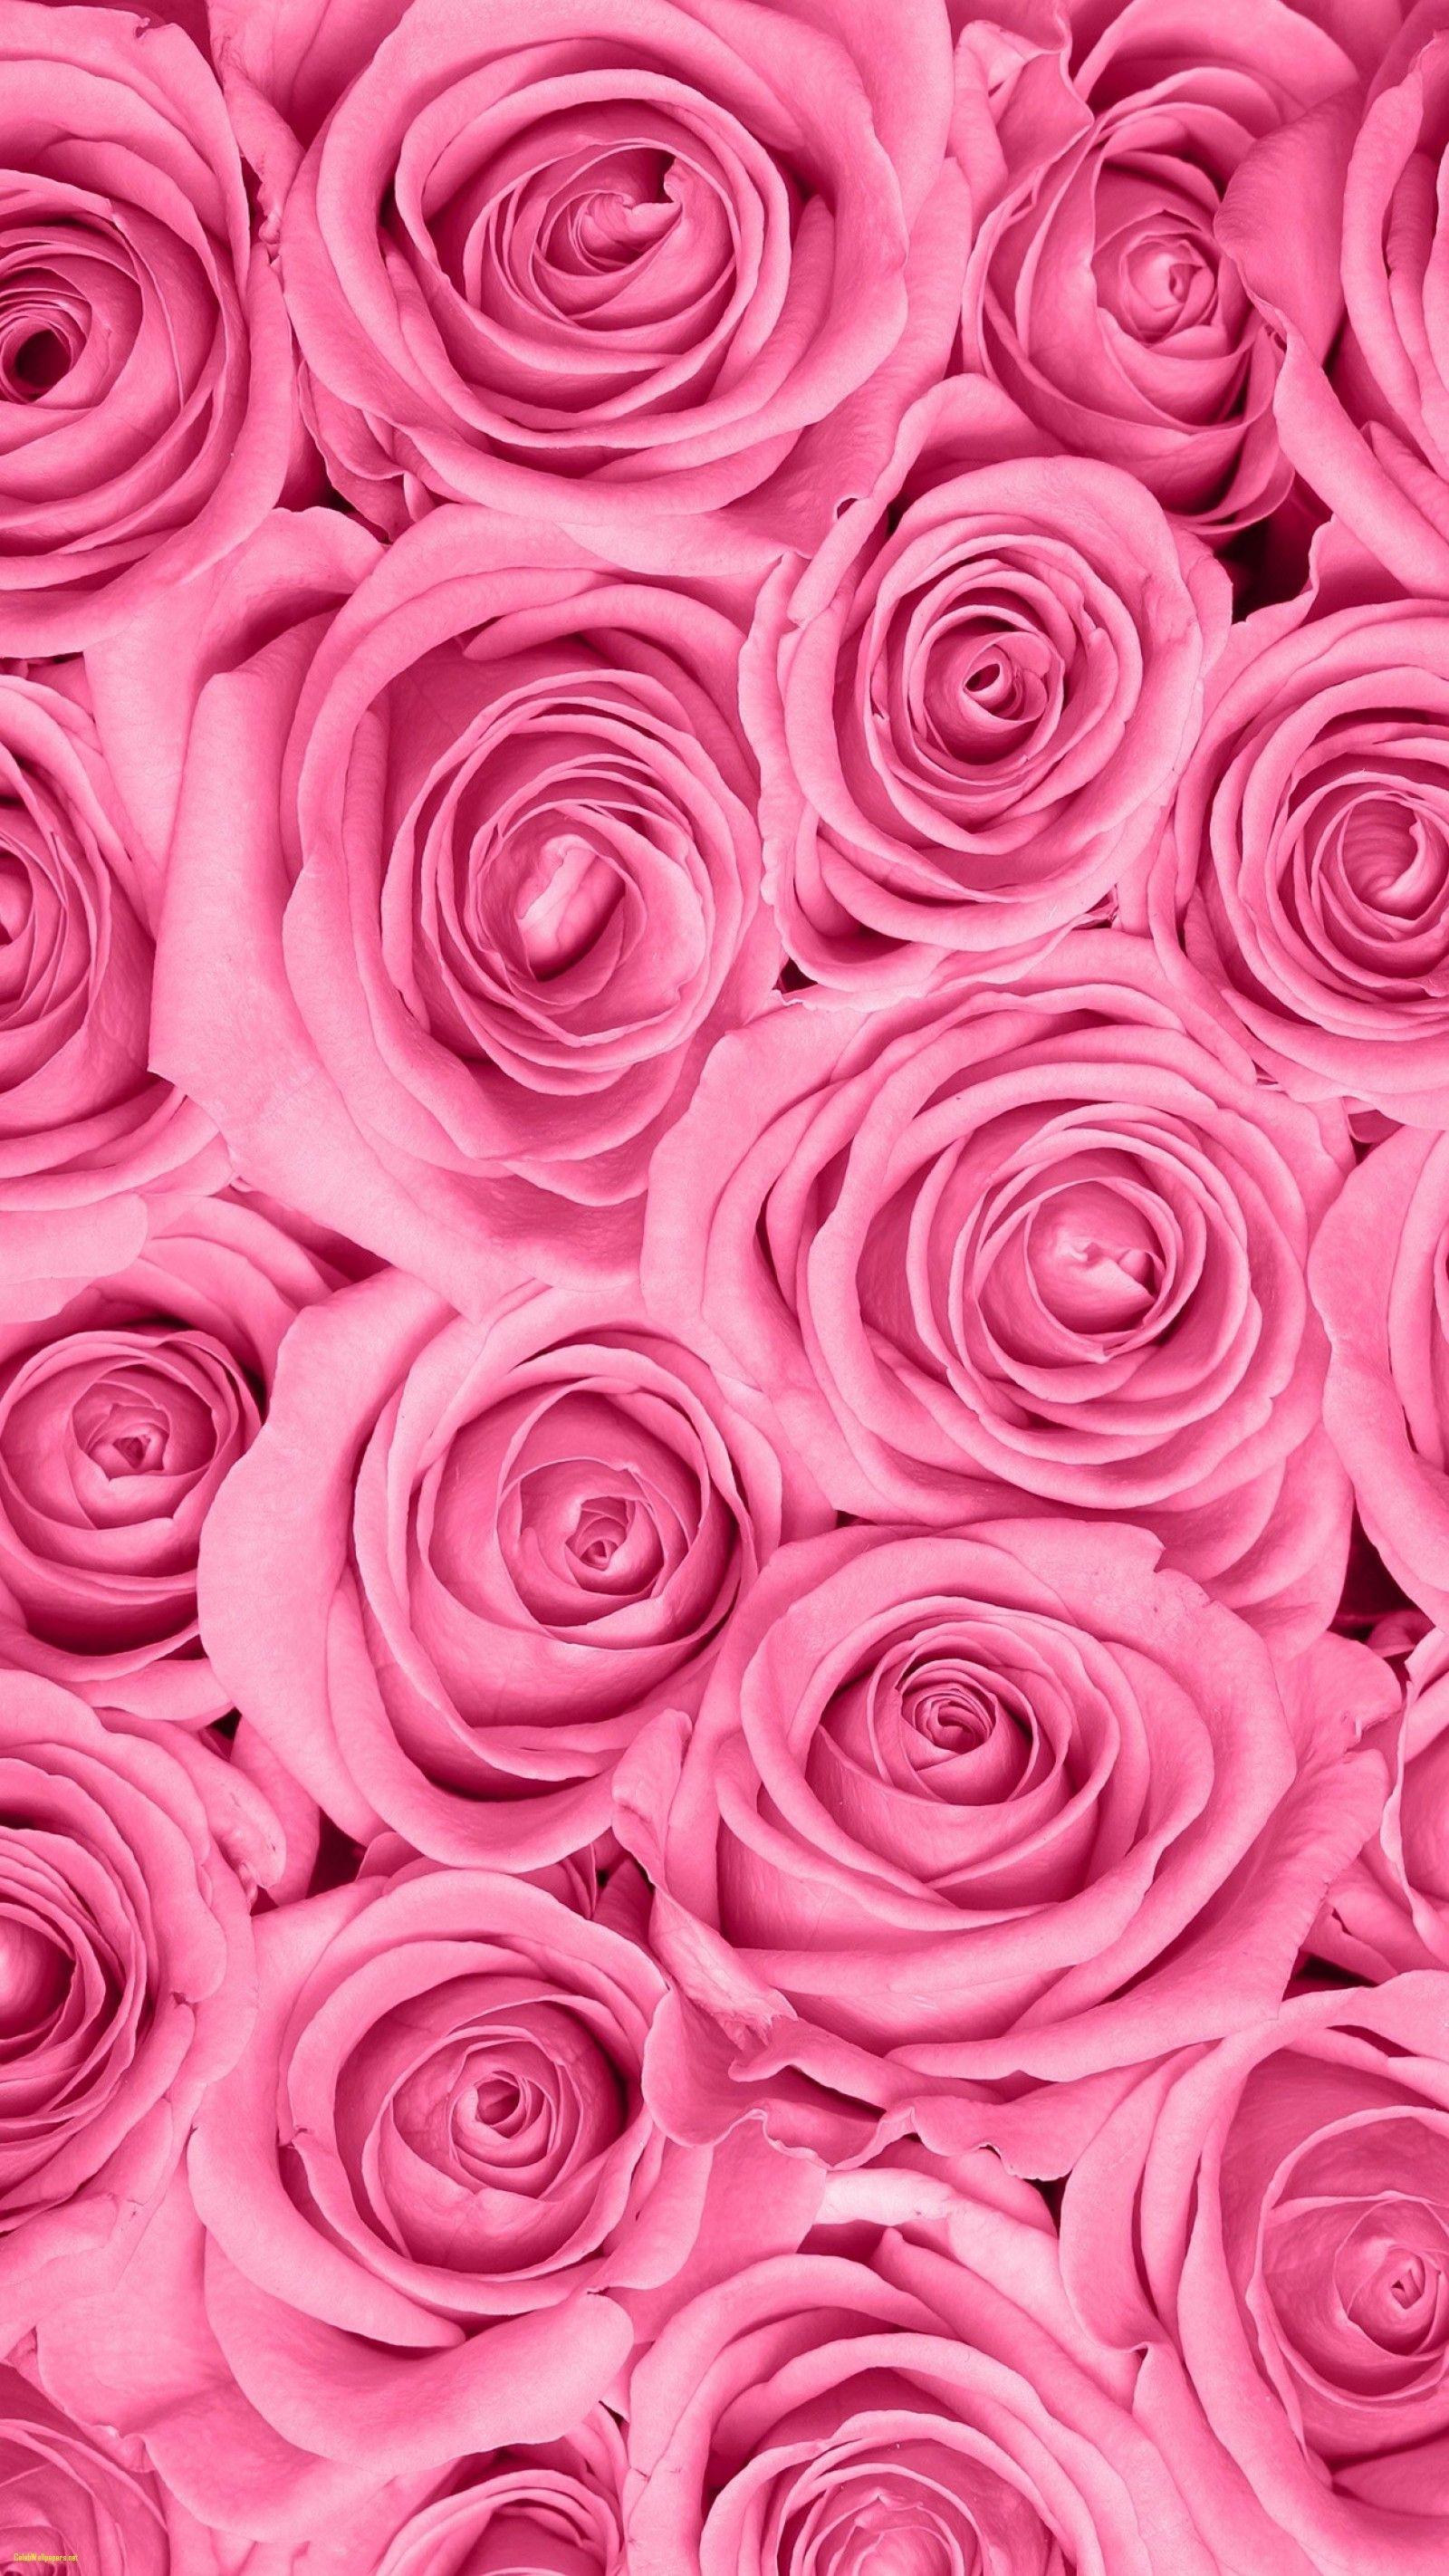 Light Pink and Dark Pink Roses